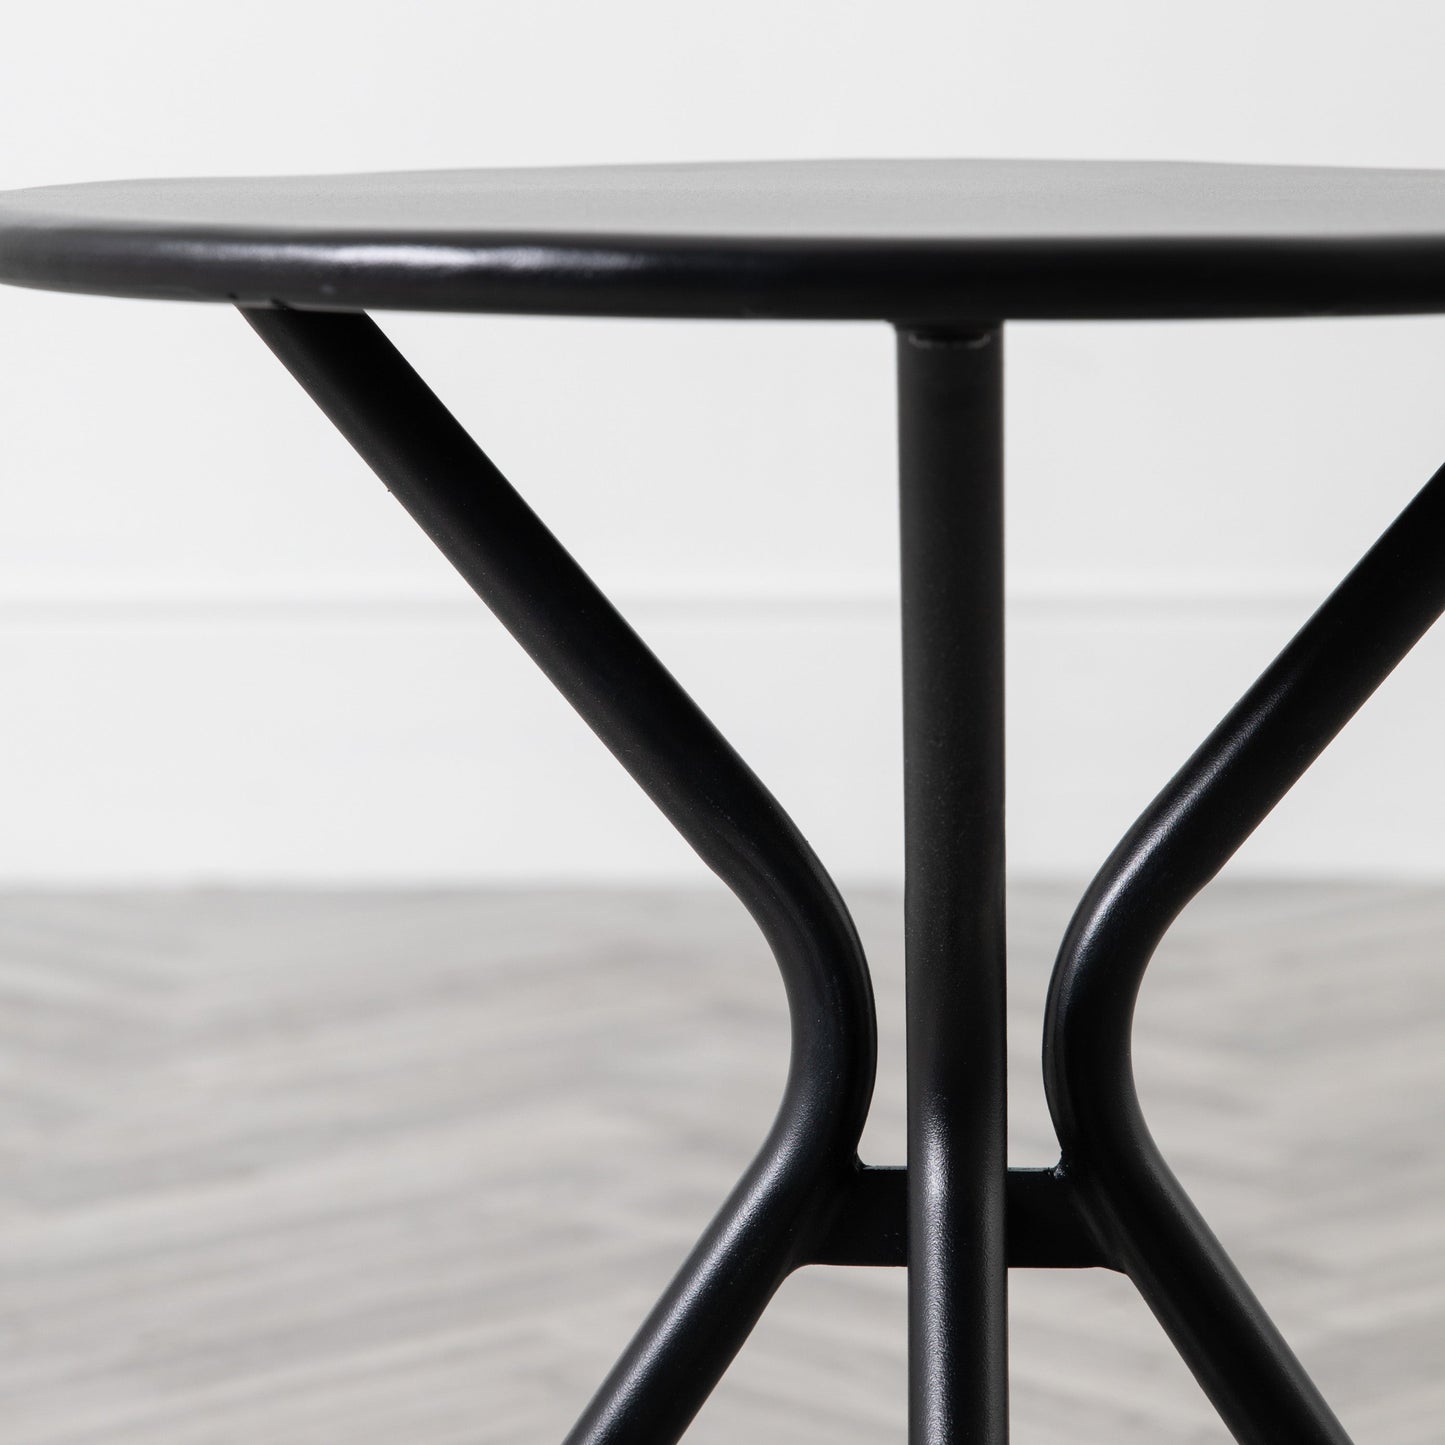 A Kikiathome.co.uk round side table adds style to interior decor as home furniture on a wooden floor.